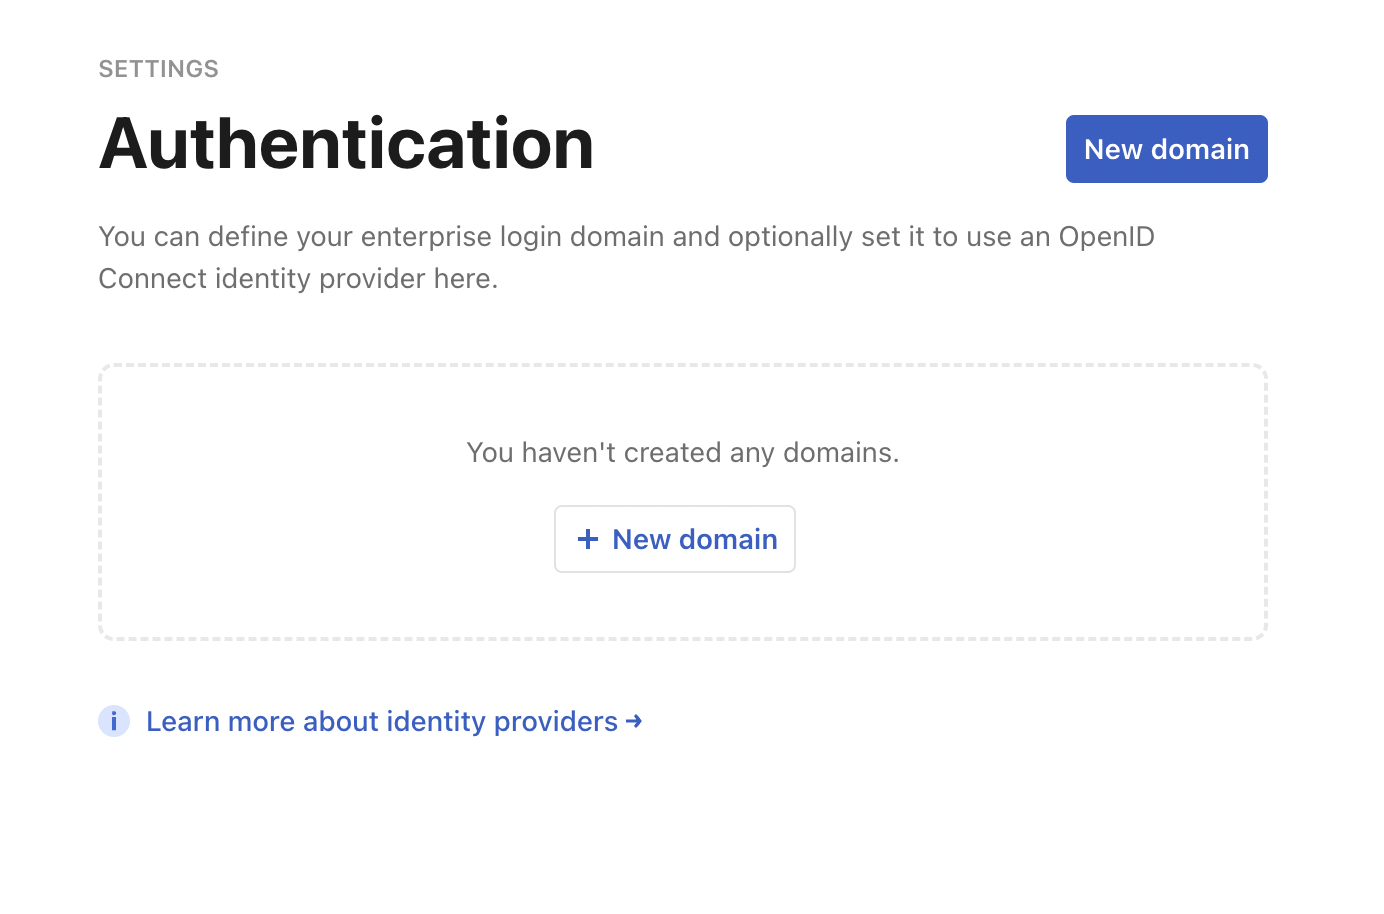 The Authentication settings, showing a button to add new domains.